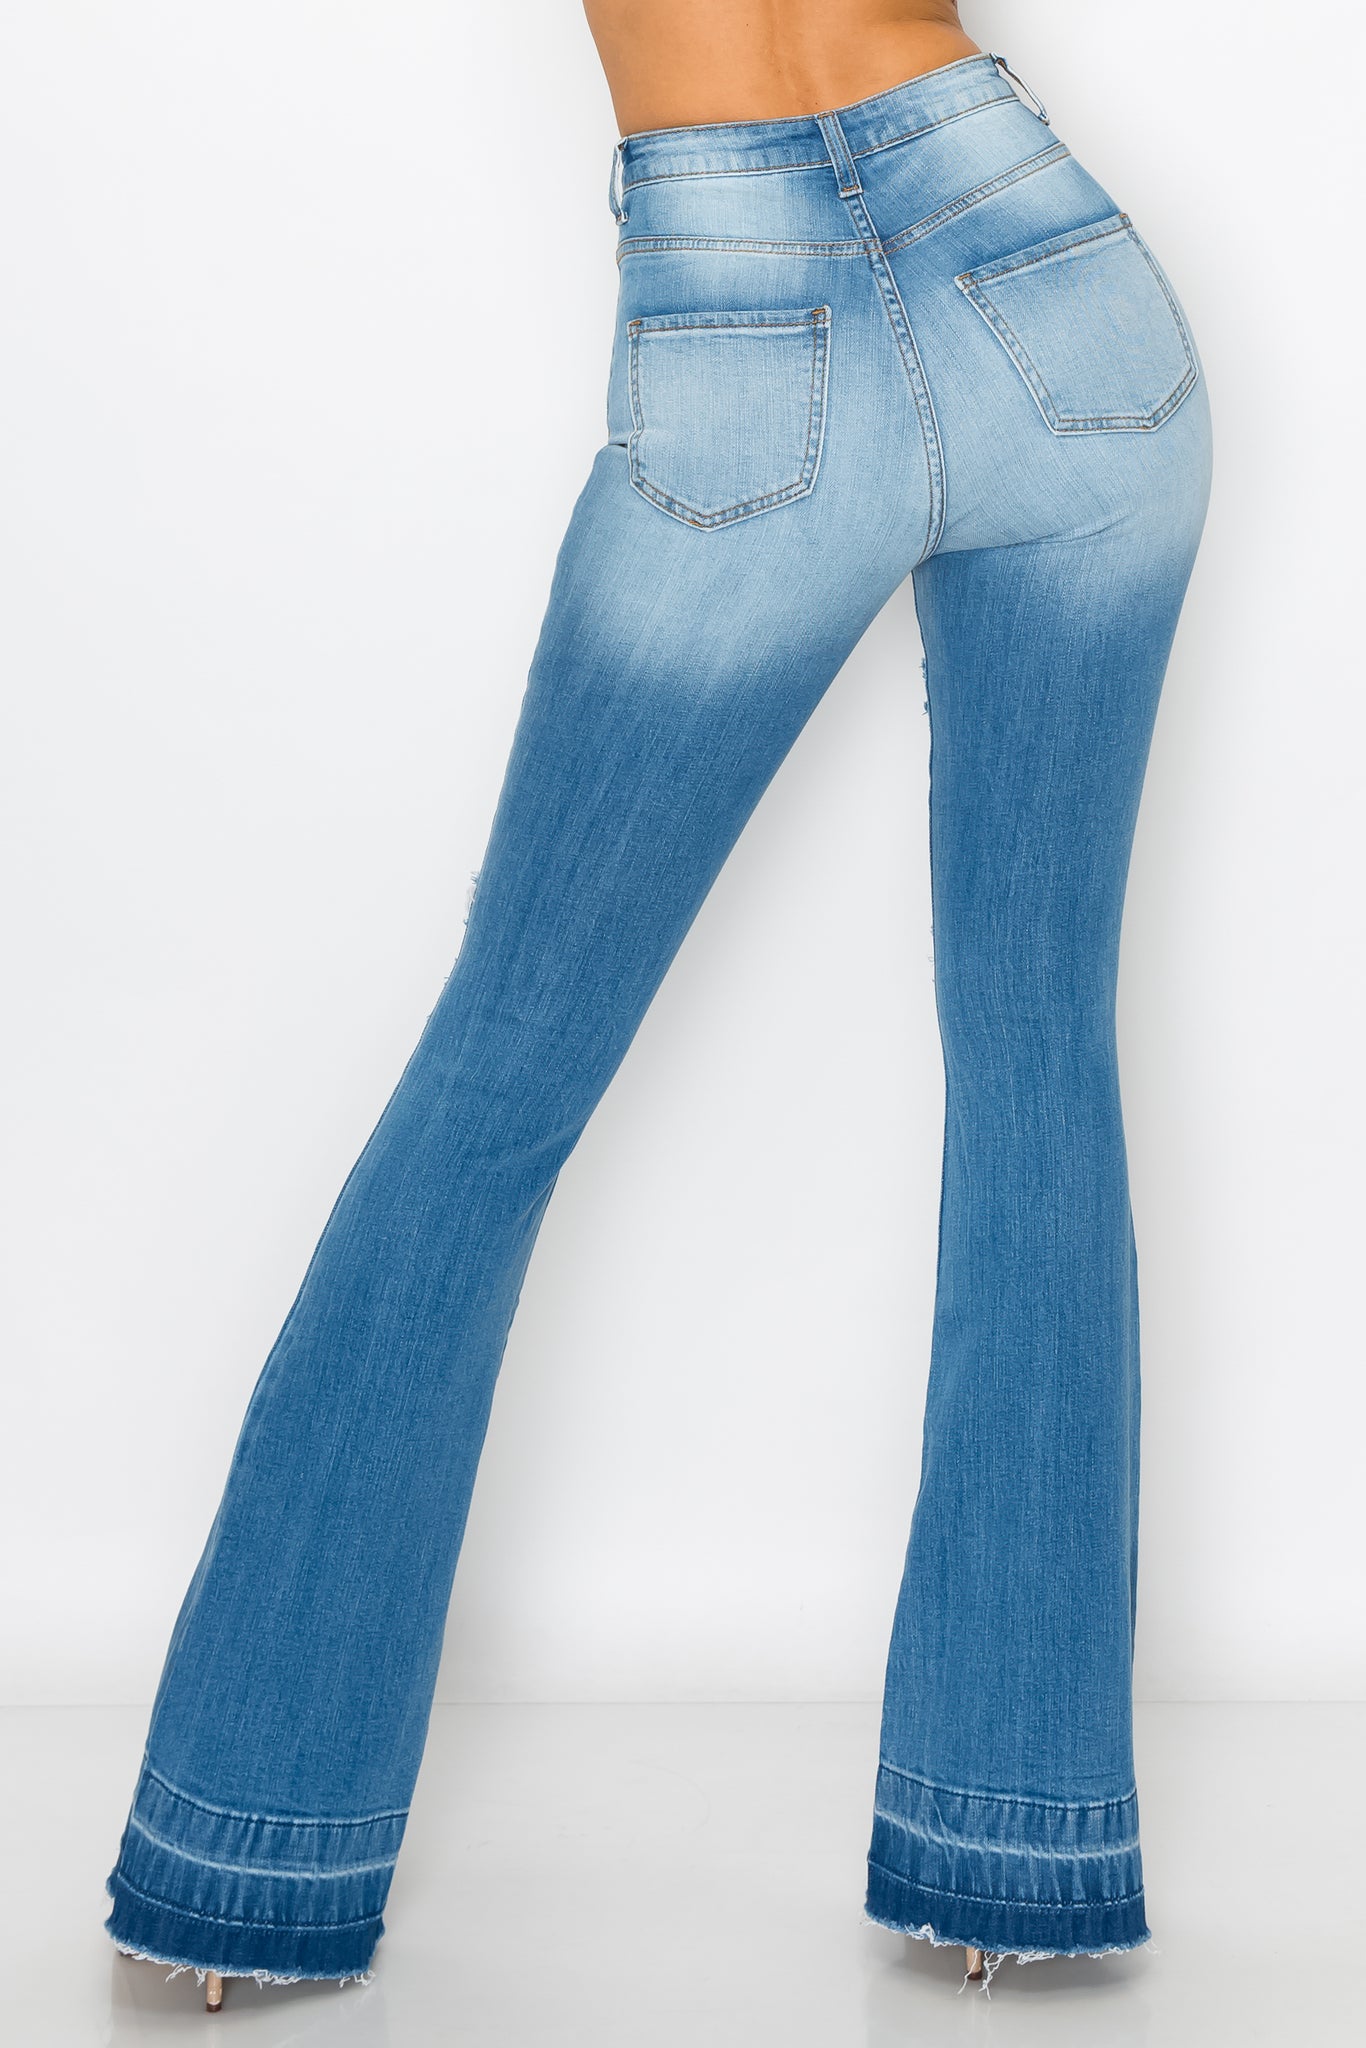 2143 Woman High Rise Light Flare Jeans W/Knee & Tight Slices